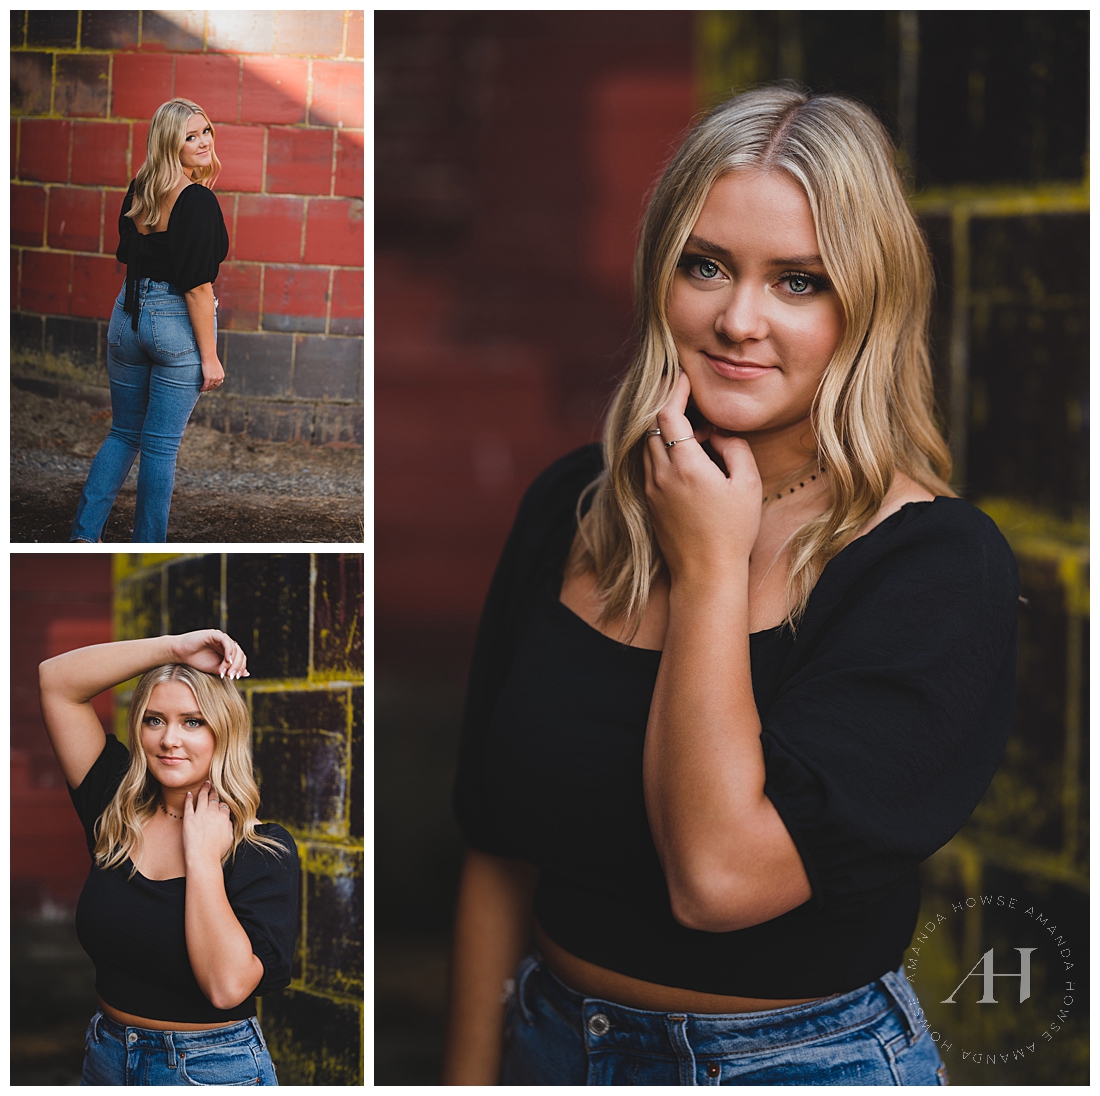 Rustic Senior Photos with Red Barn Backdrop | Cute Outfit Inspo for High School Seniors | Photographed by the Best Tacoma Senior Photographer Amanda Howse Photography